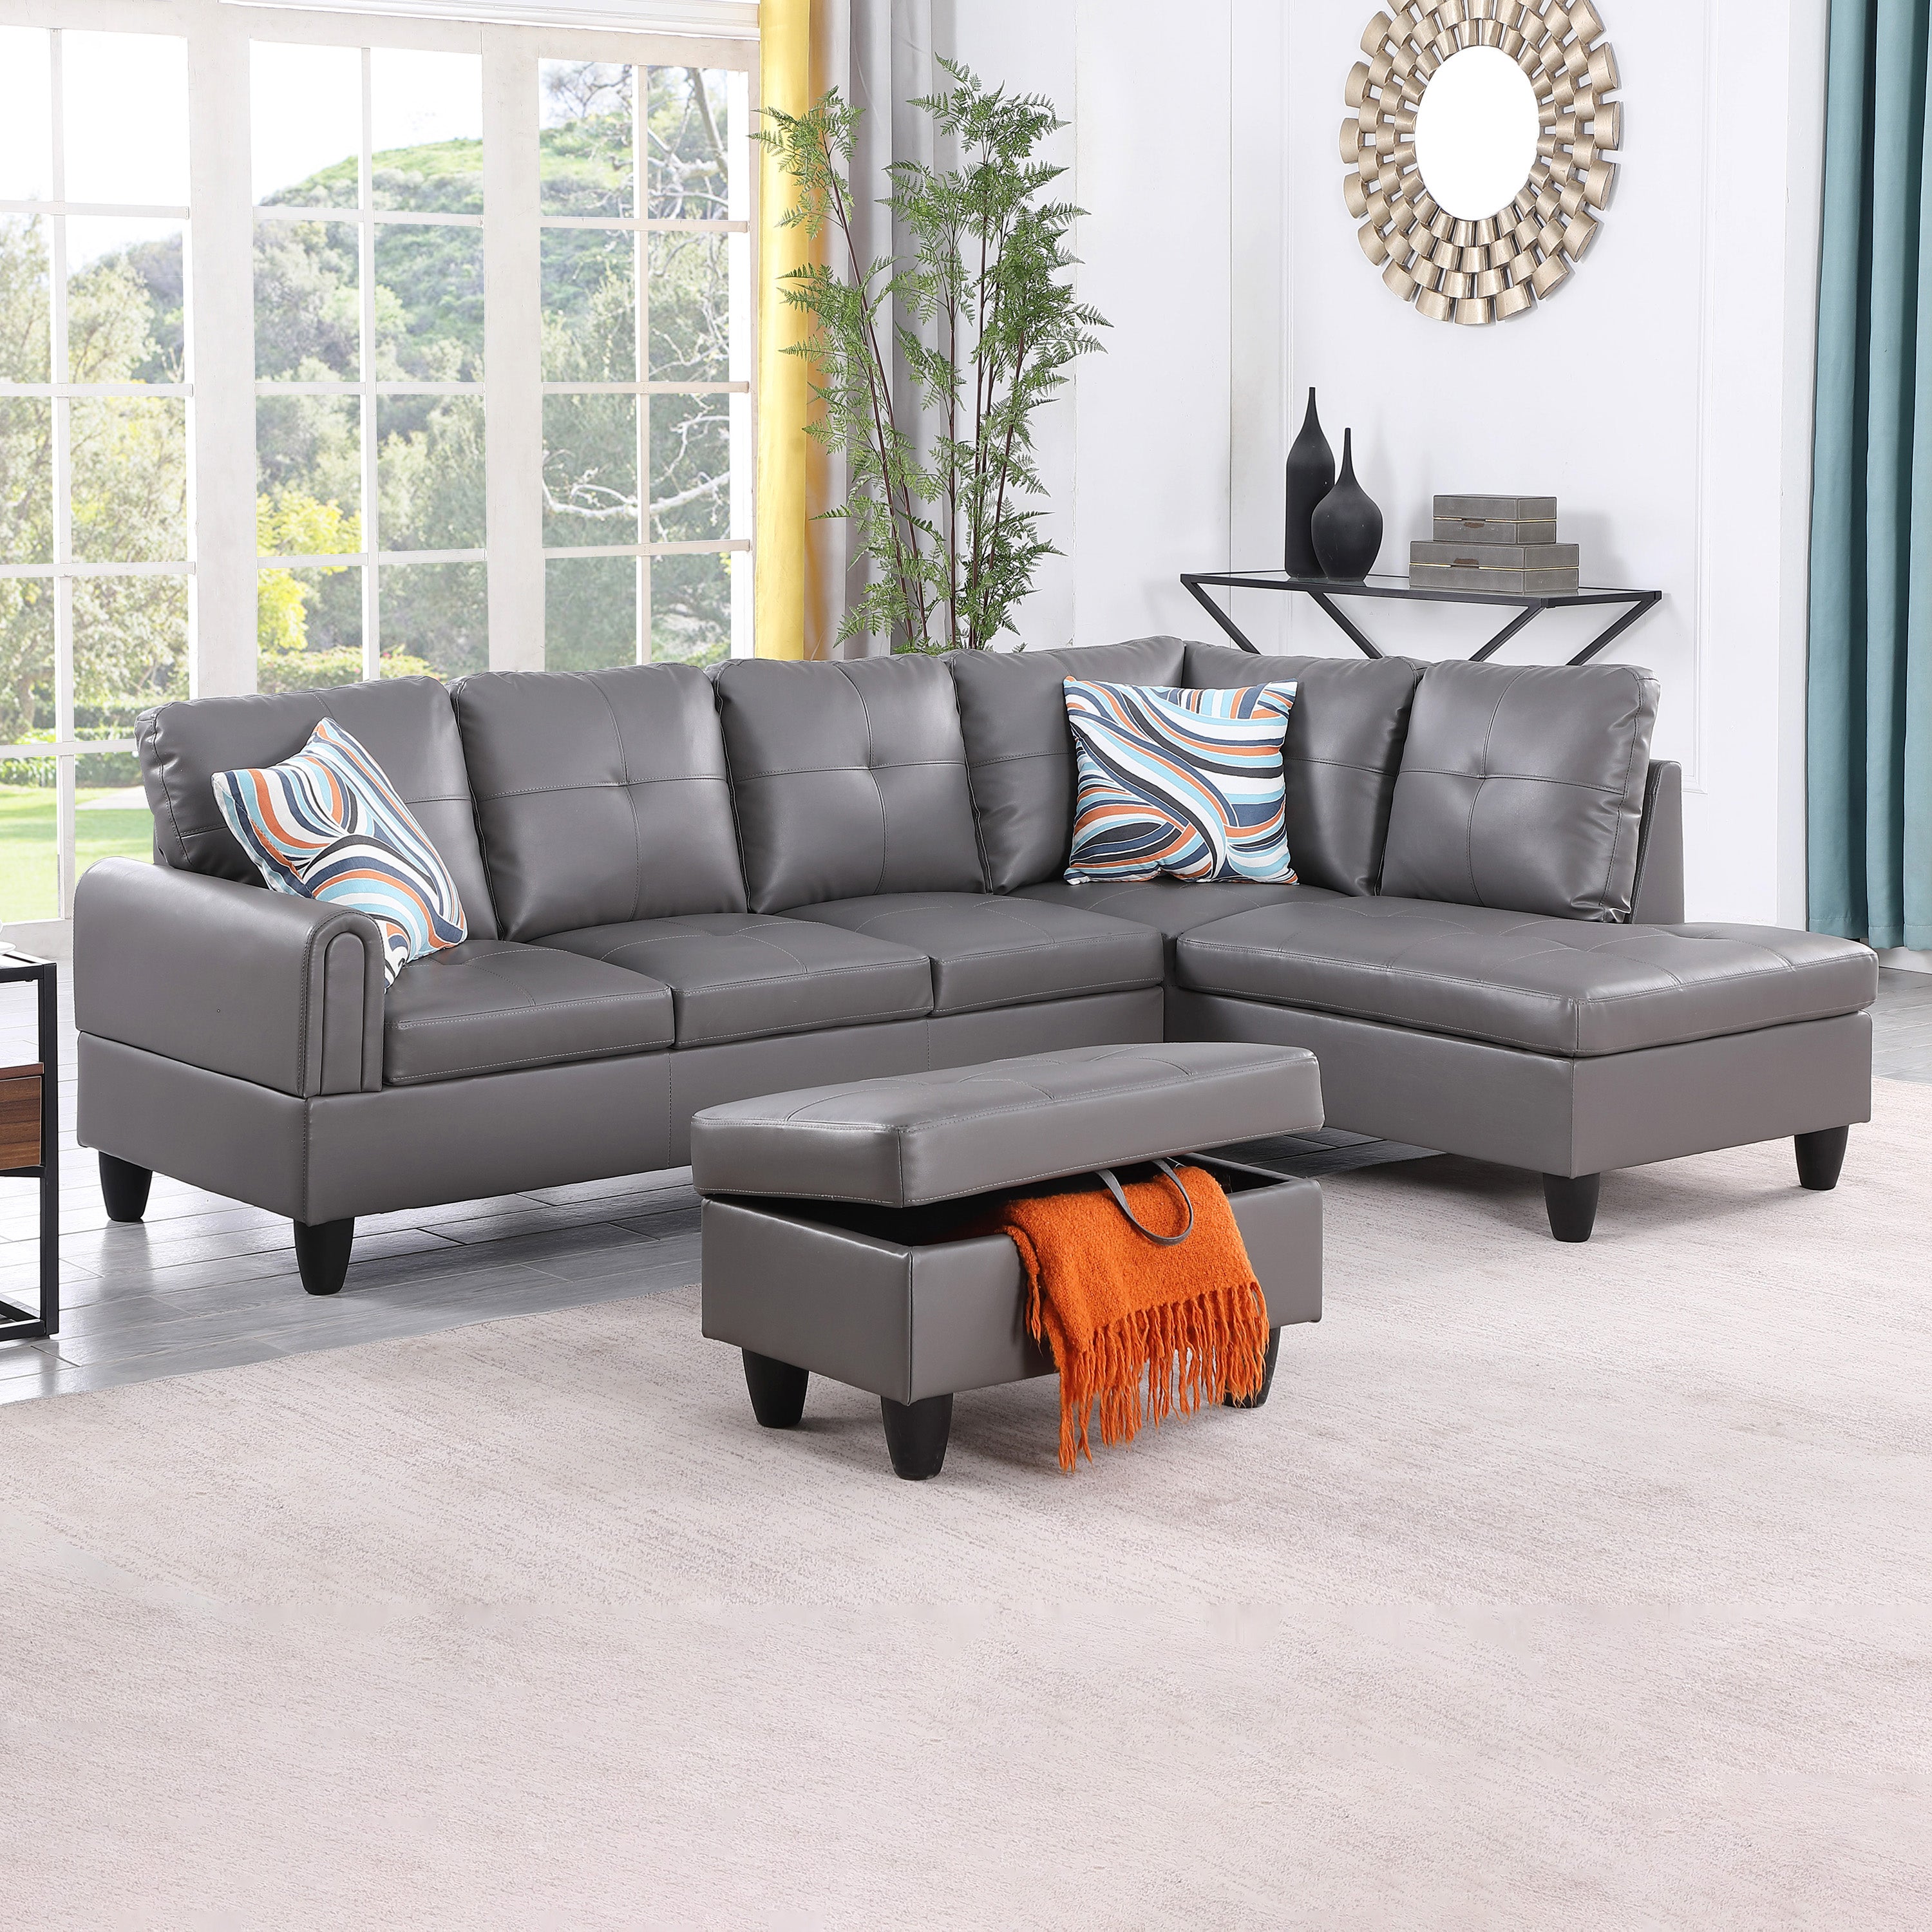 Ainehome Dark Grey Faux Leather Living Room Sofa Set